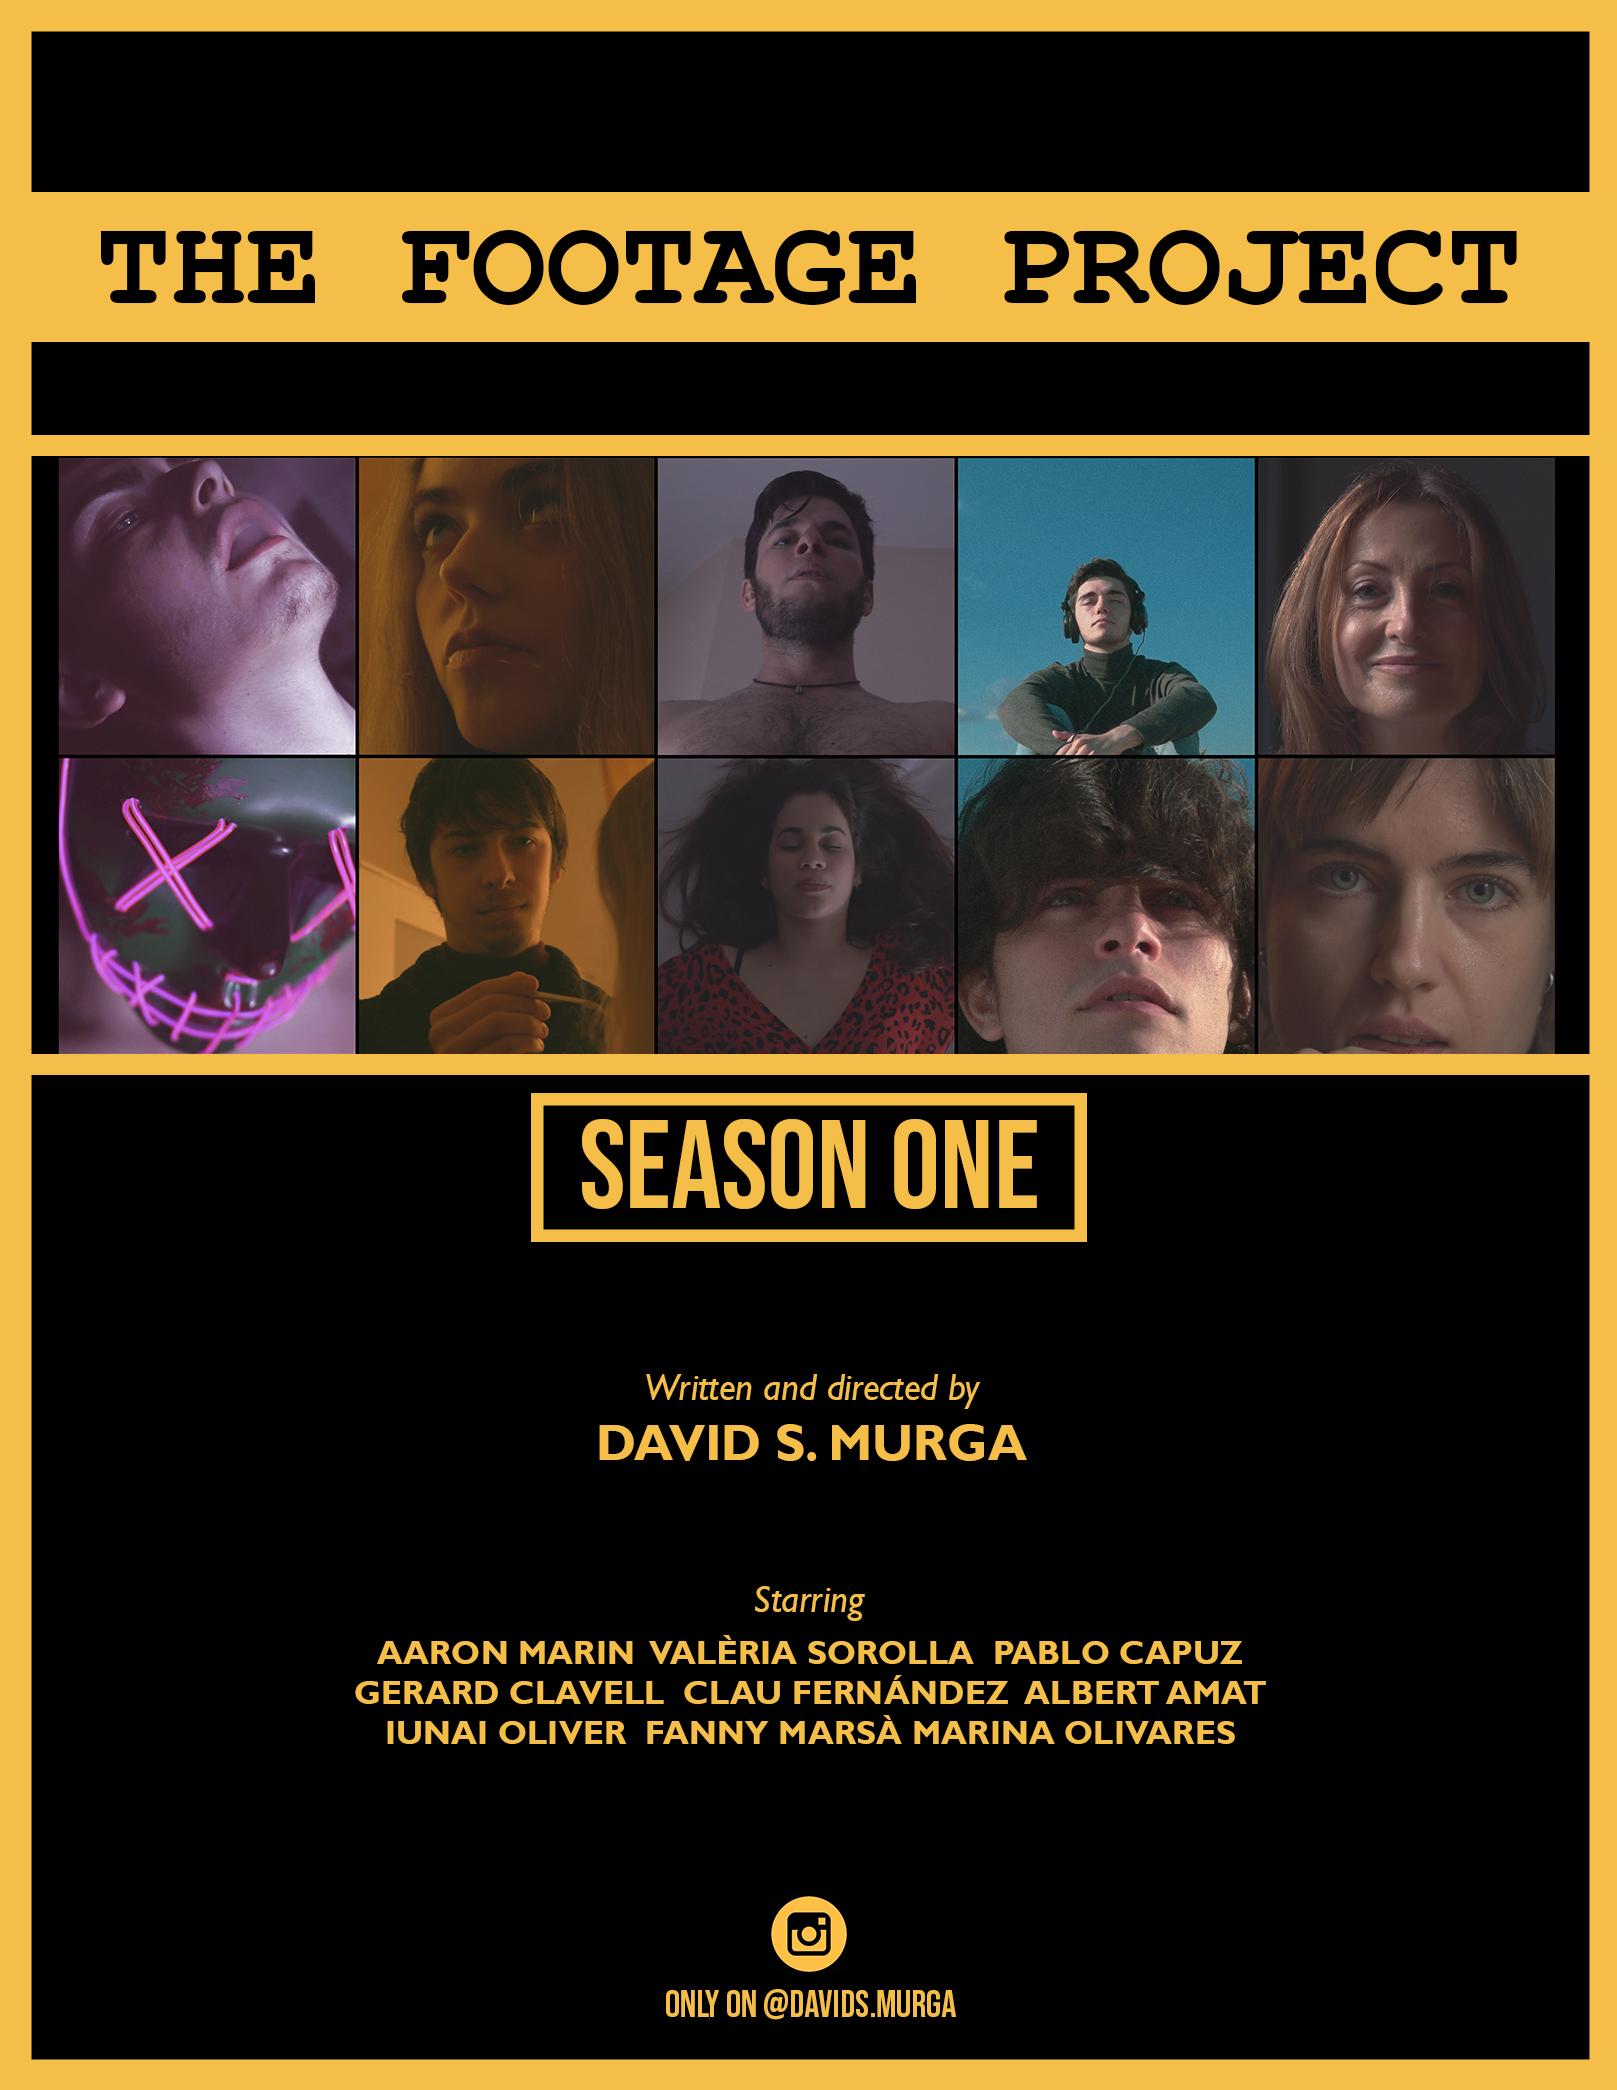 The Footage Project